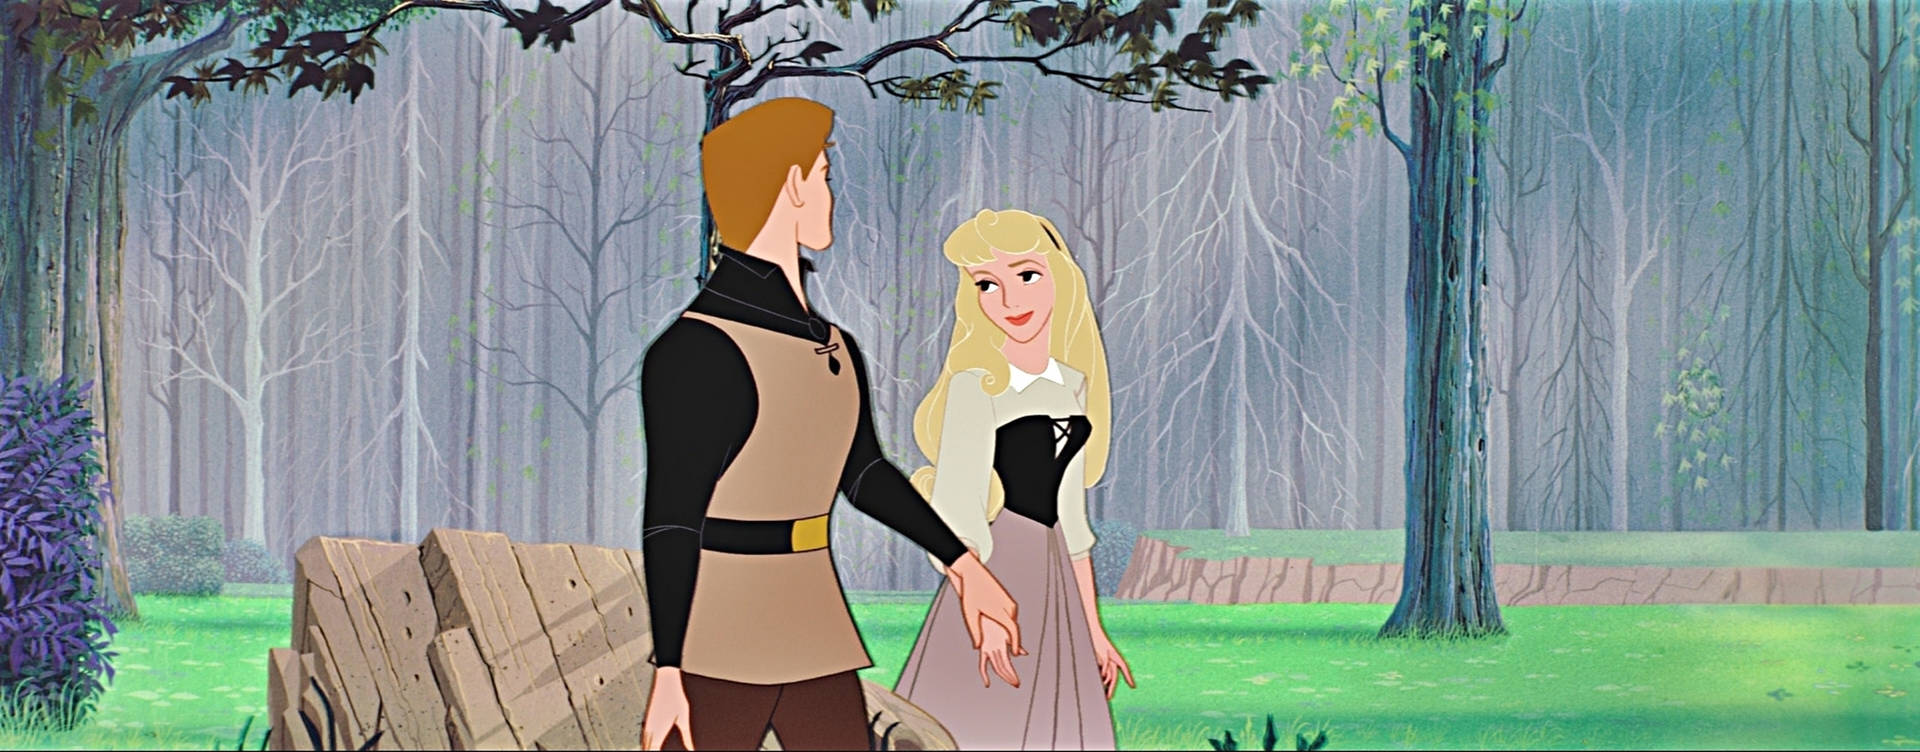 Disney Princess And Prince In Forest Background